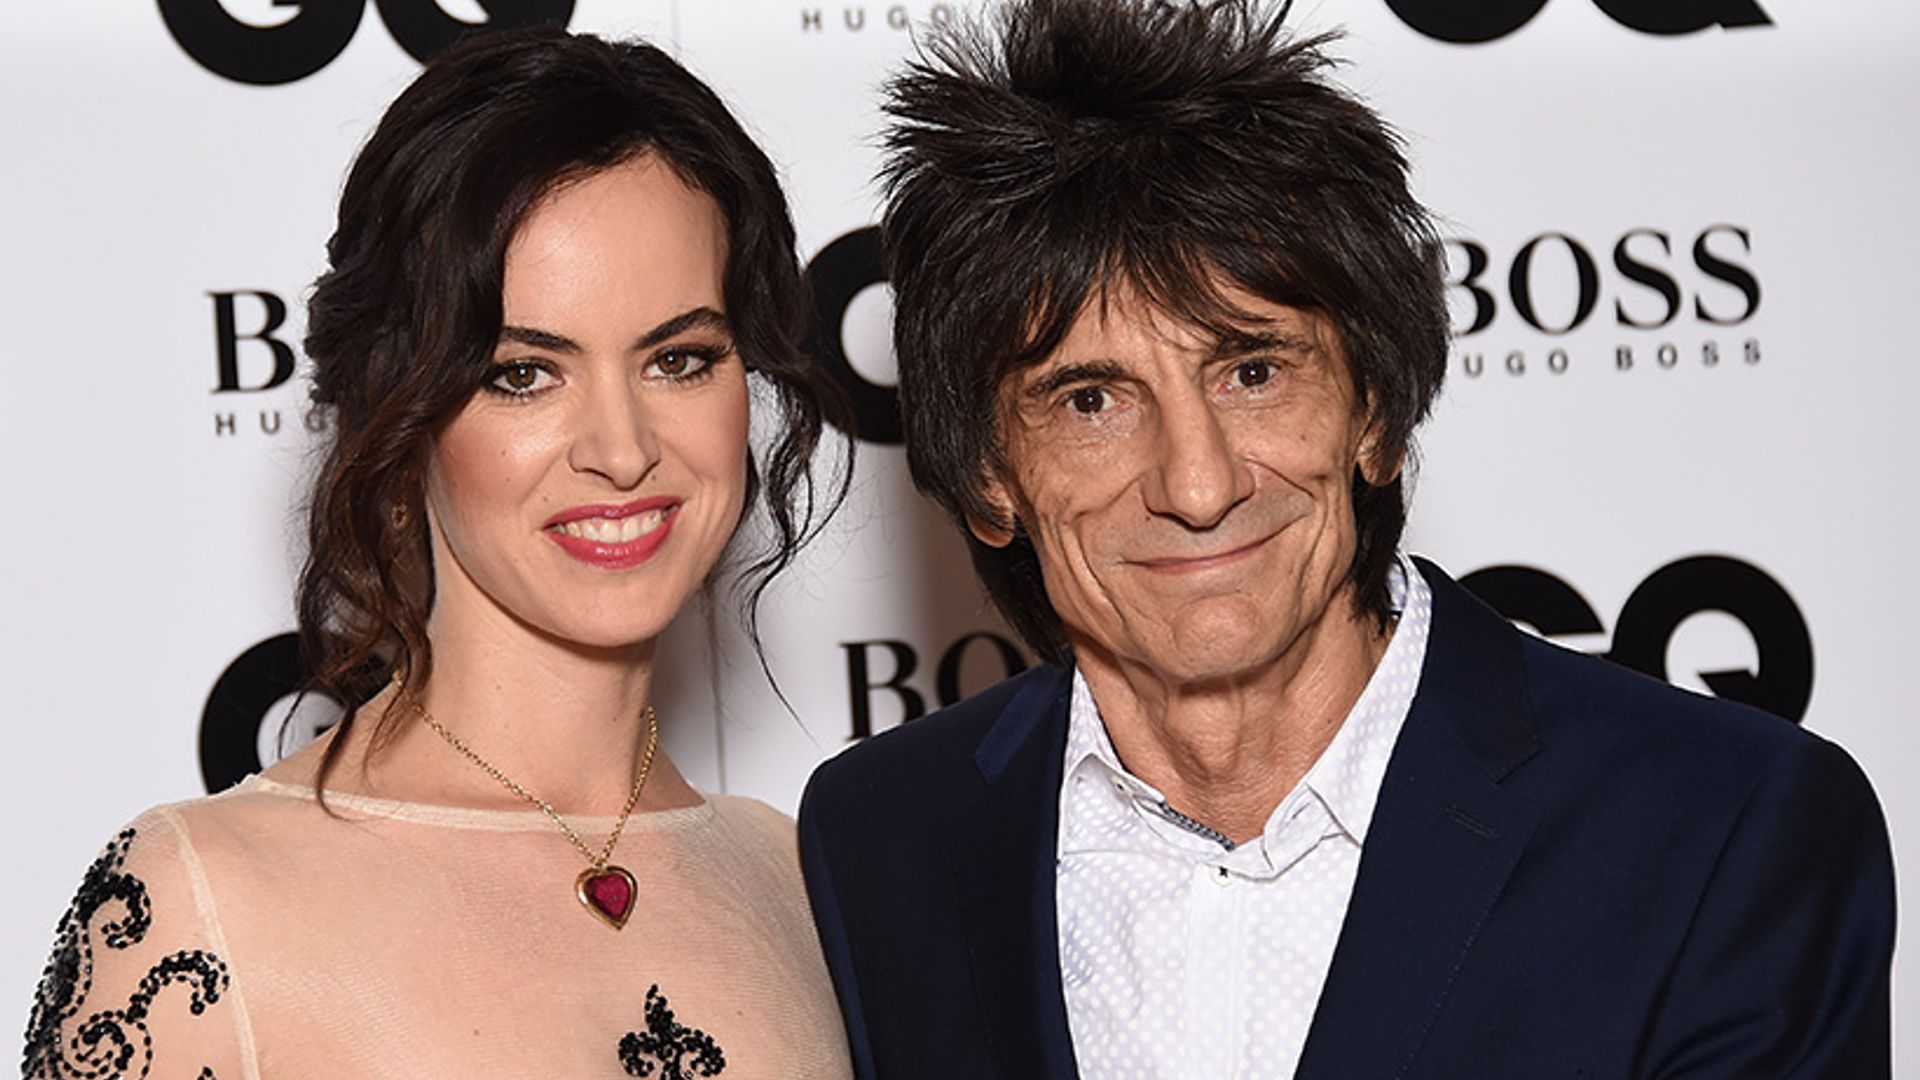 Ronnie and Sally Wood's twin daughters steal the show in cute family photo